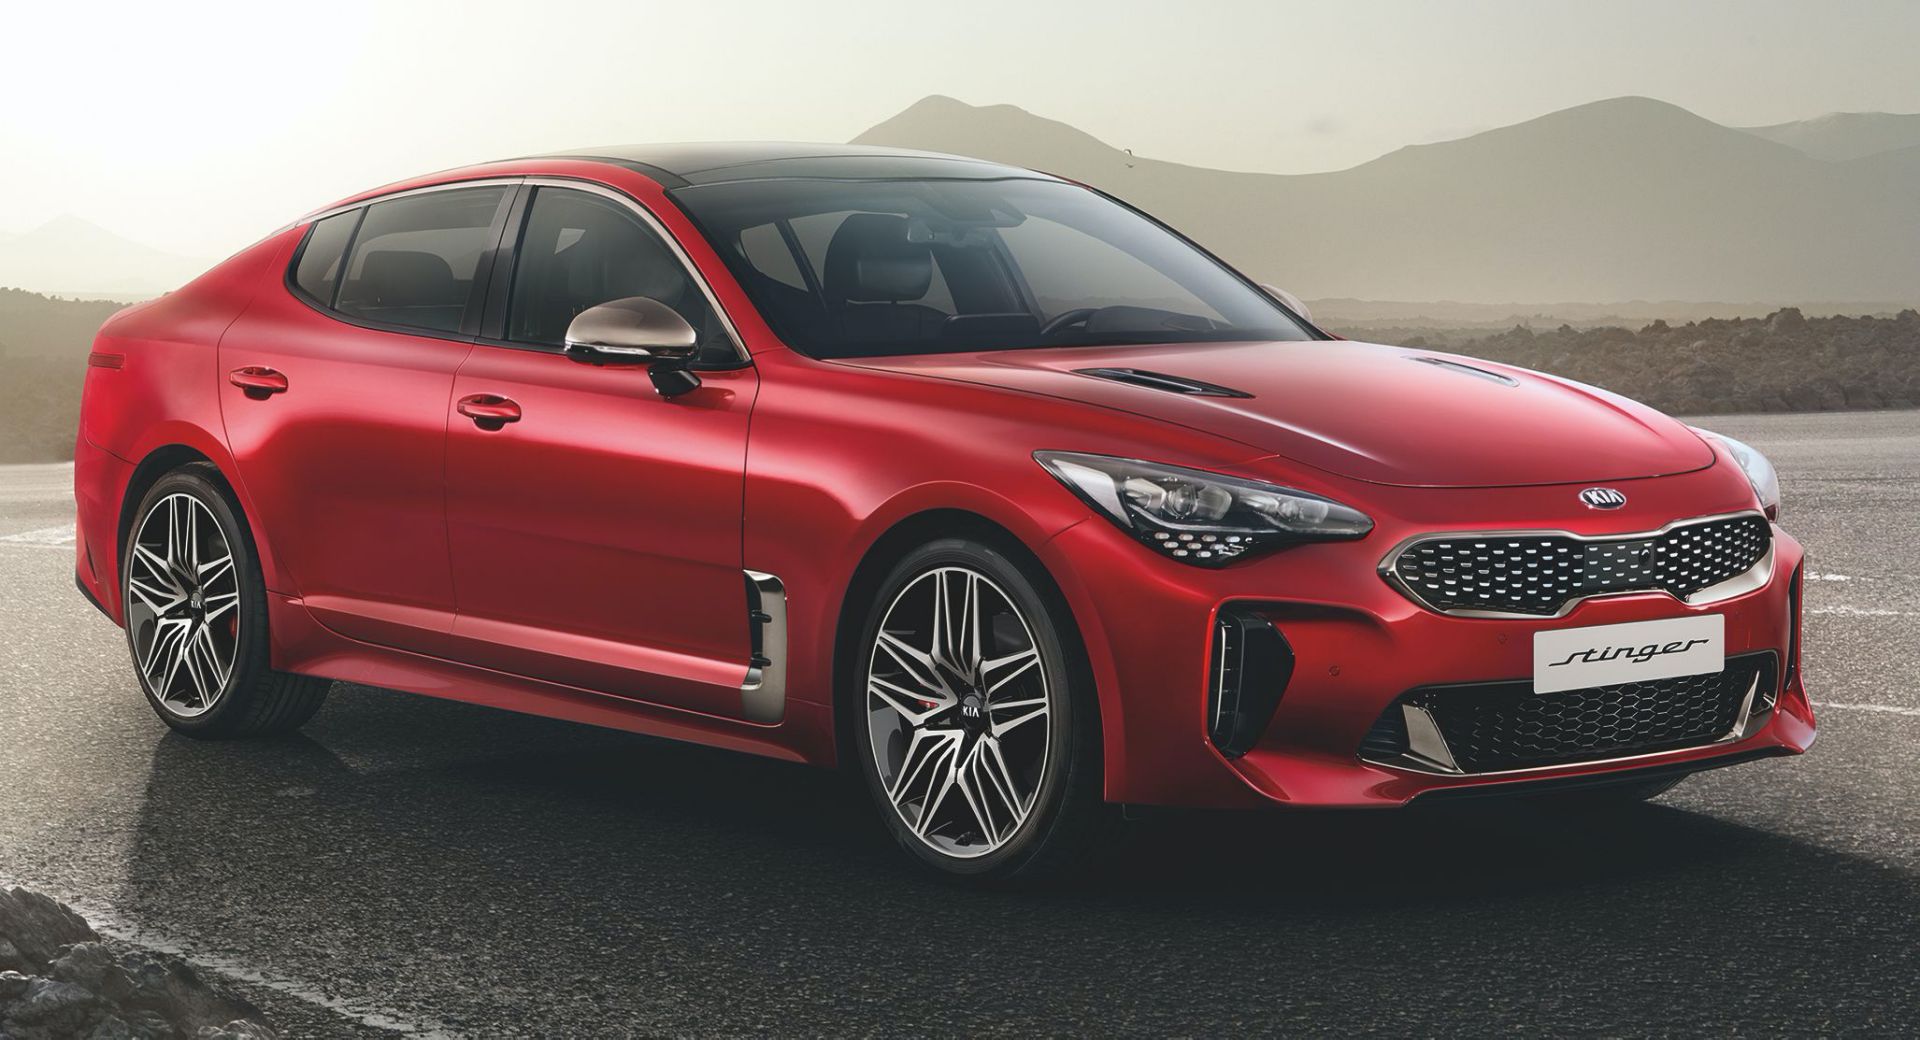 2021 Kia Stinger Goes V6Only In Europe, Brings Styling And Tech